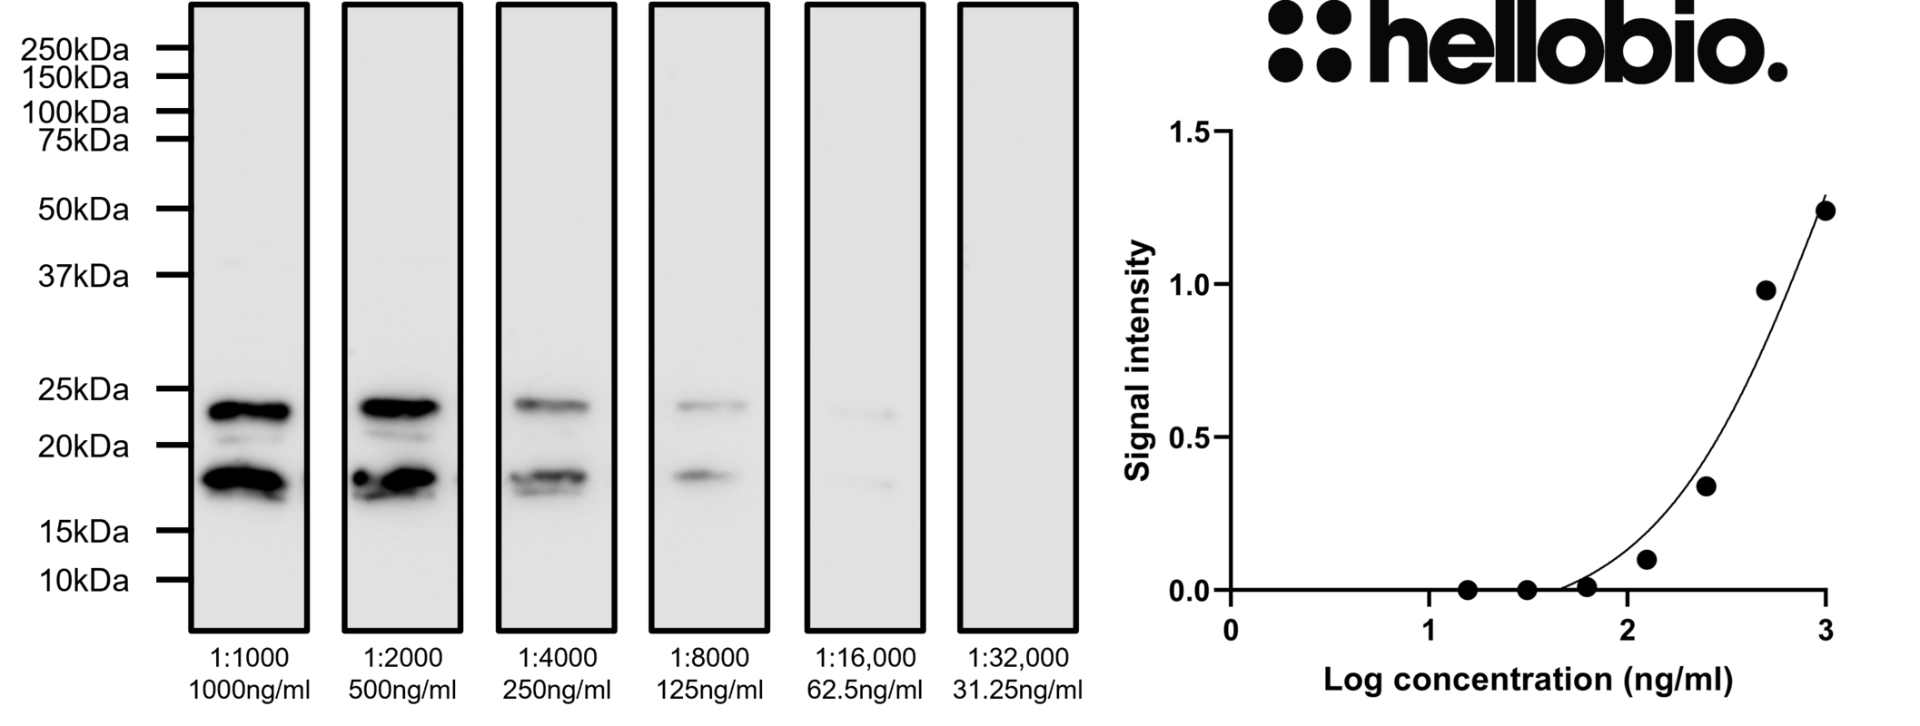 Figure 4. Concentration response of HB8014 staining in a rat brain P2 fraction preparation. 